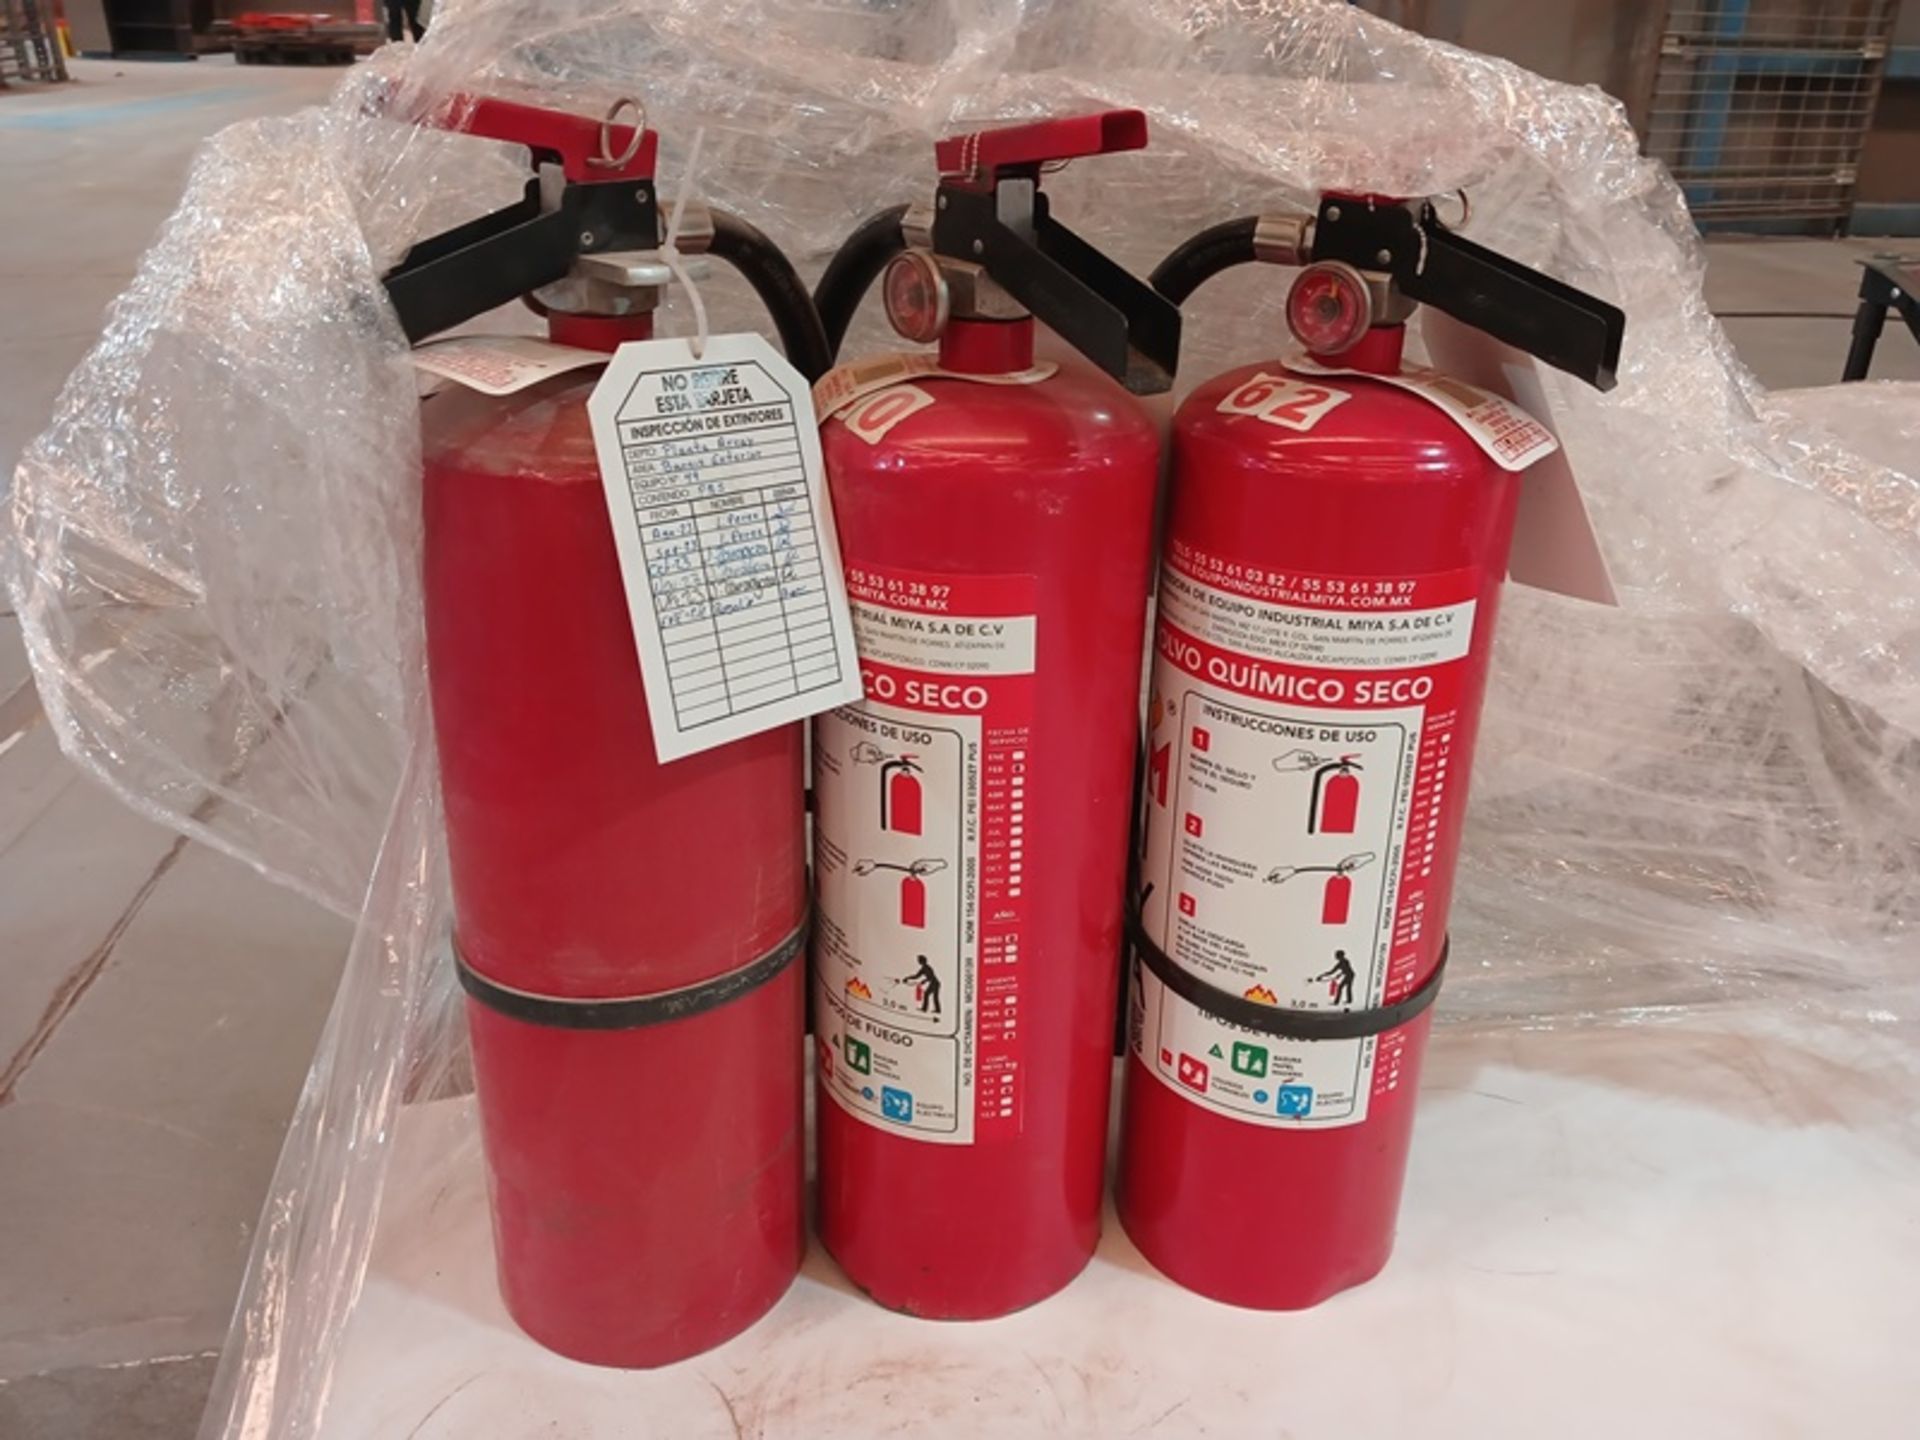 LOT OF (82) FIRE EXTINGUISHERS AND (12) SUPRPRESION GRENADES - Image 4 of 8